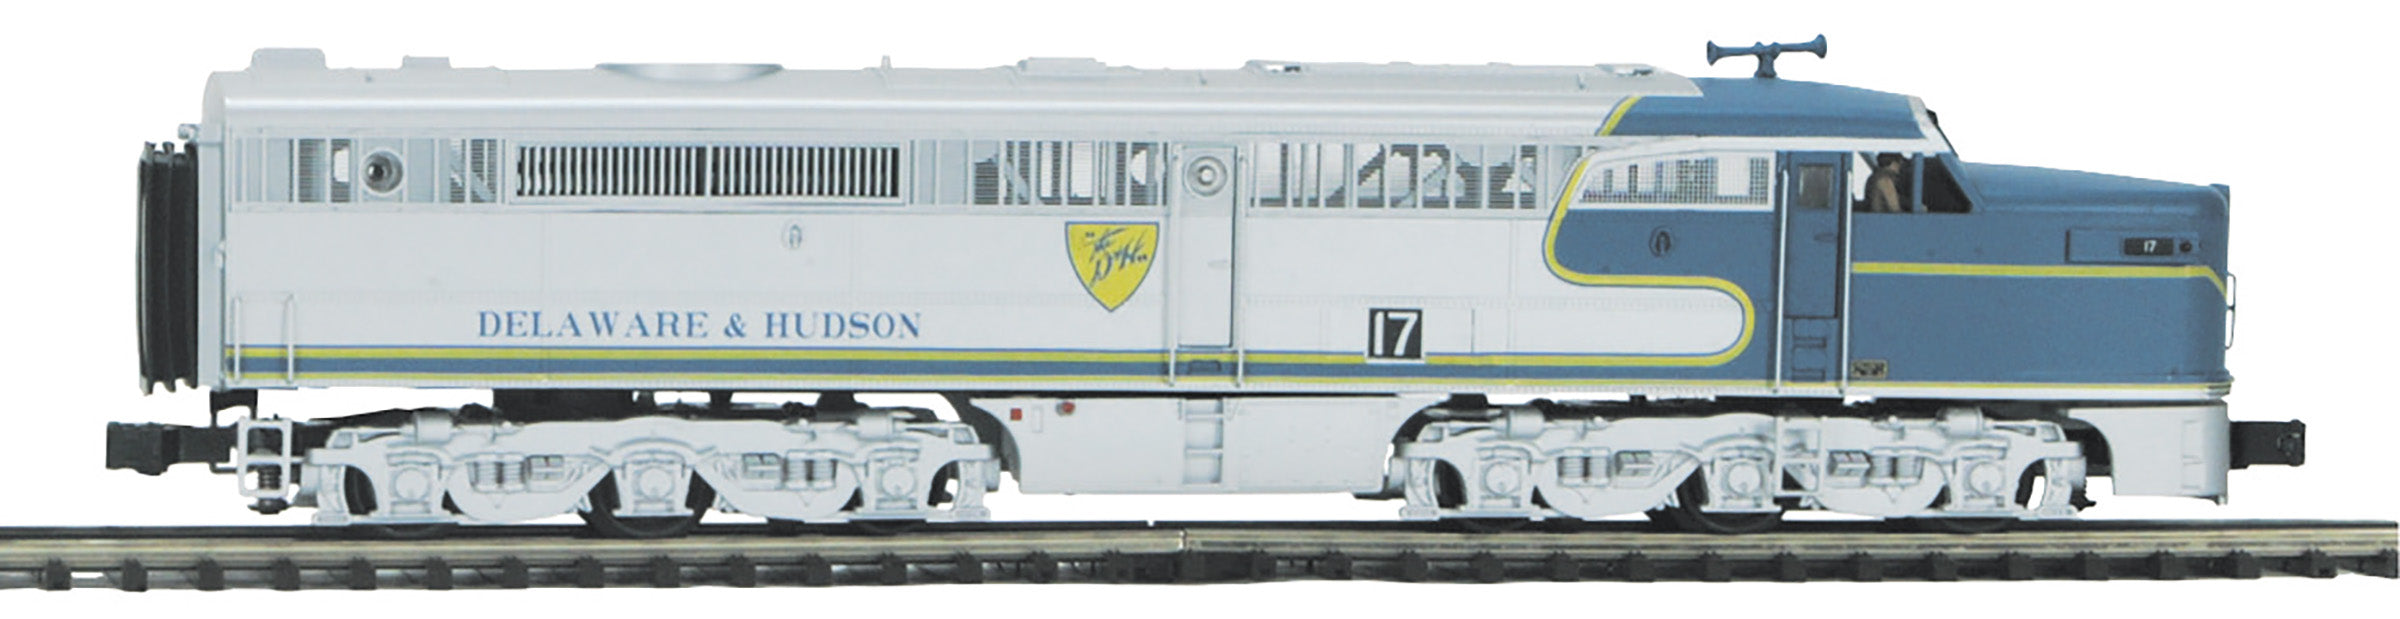 MTH 20-21871-4 - Alco PA A Unit Diesel Locomotive "Delaware & Hudson" #17 w/ PS3 (Non-Powered) Plated